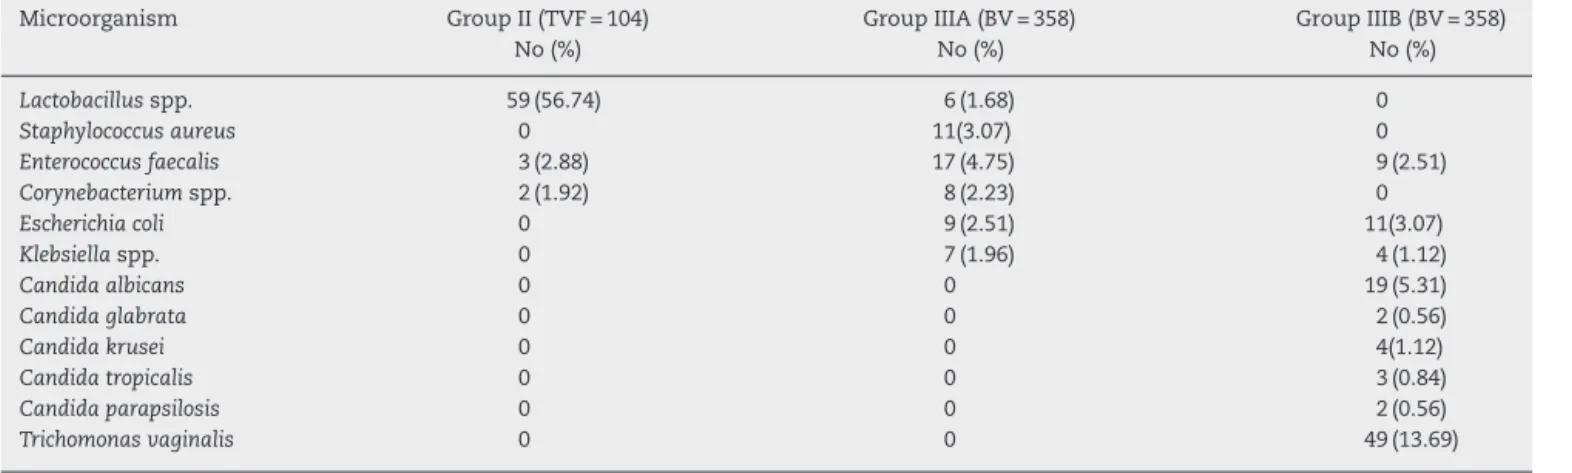 Table 2 – Isolate distribution among 104 women with diagnosis TVF and 358 women with BV according to Gram staining